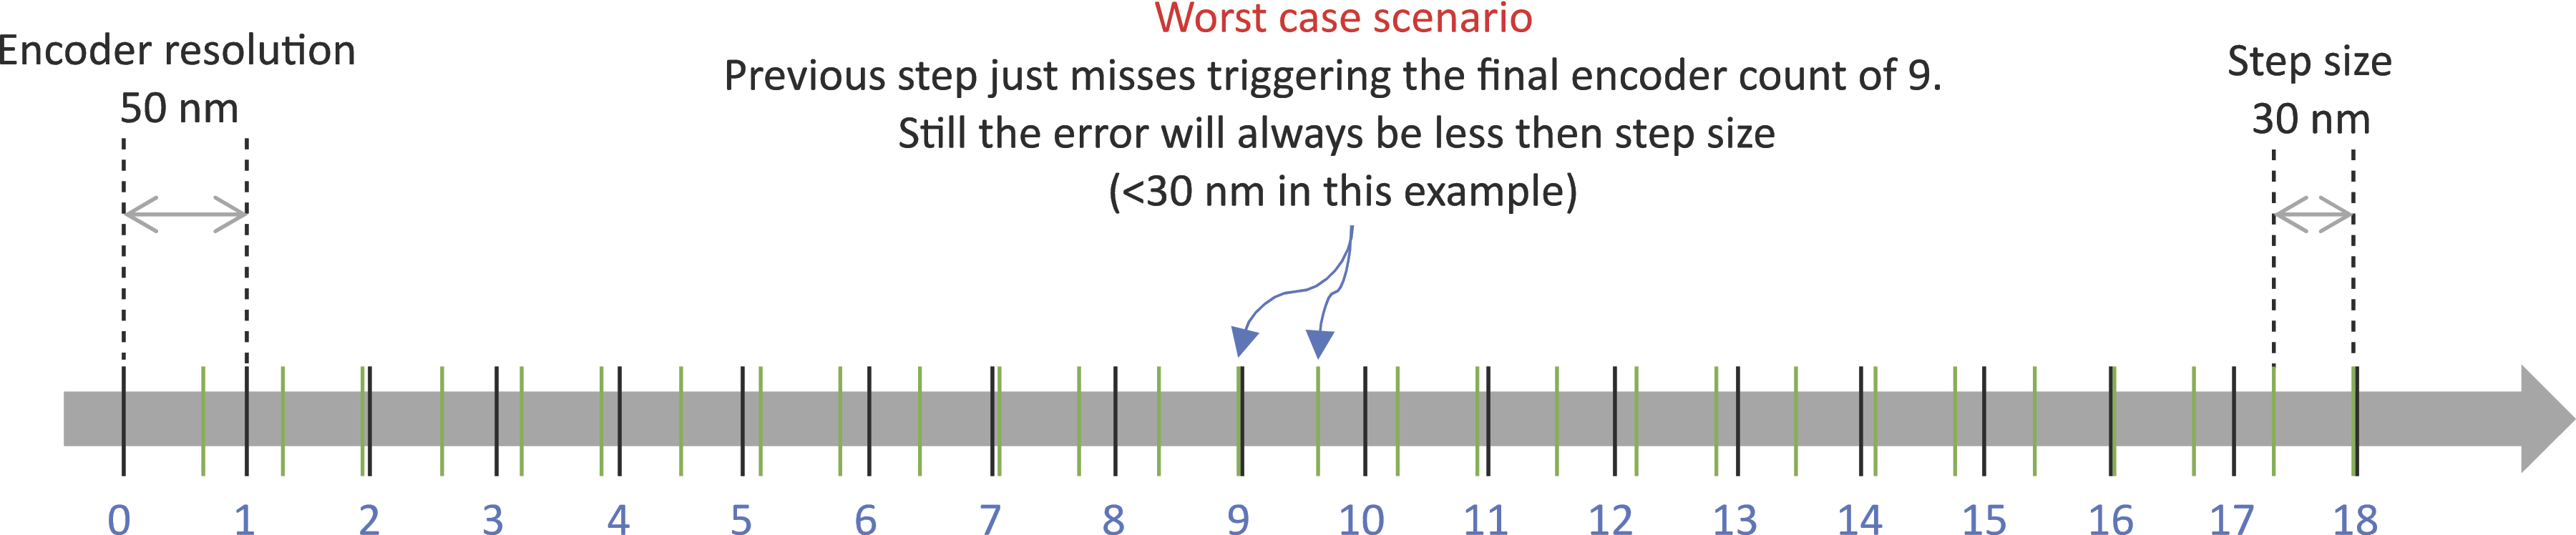 graph of worst-case scenario when previous motion step just misses triggering an encoder count